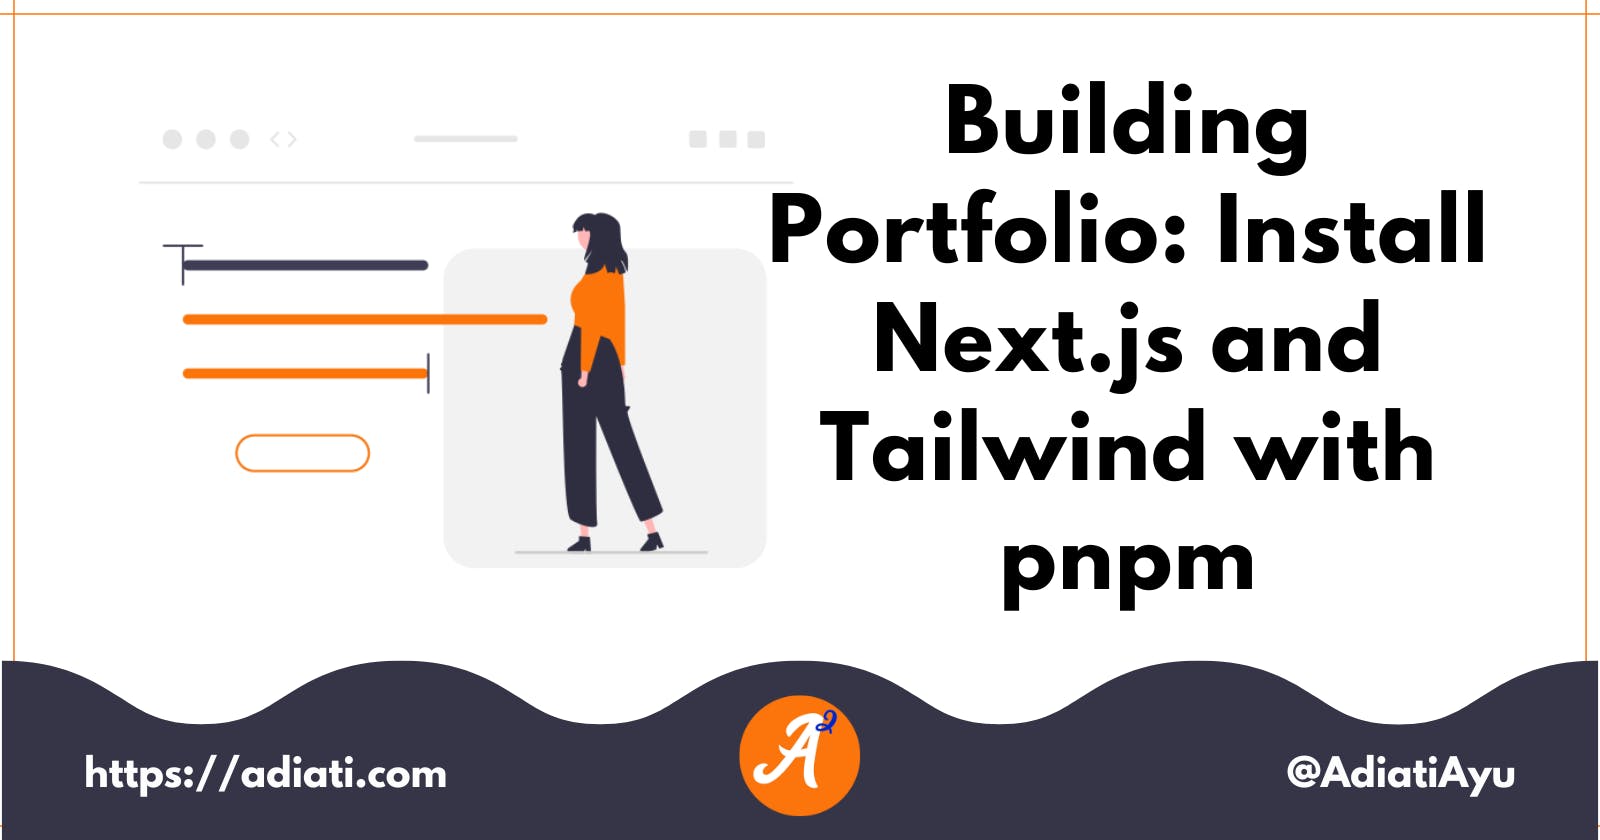 Building Portfolio: Install Next.js and Tailwind with pnpm